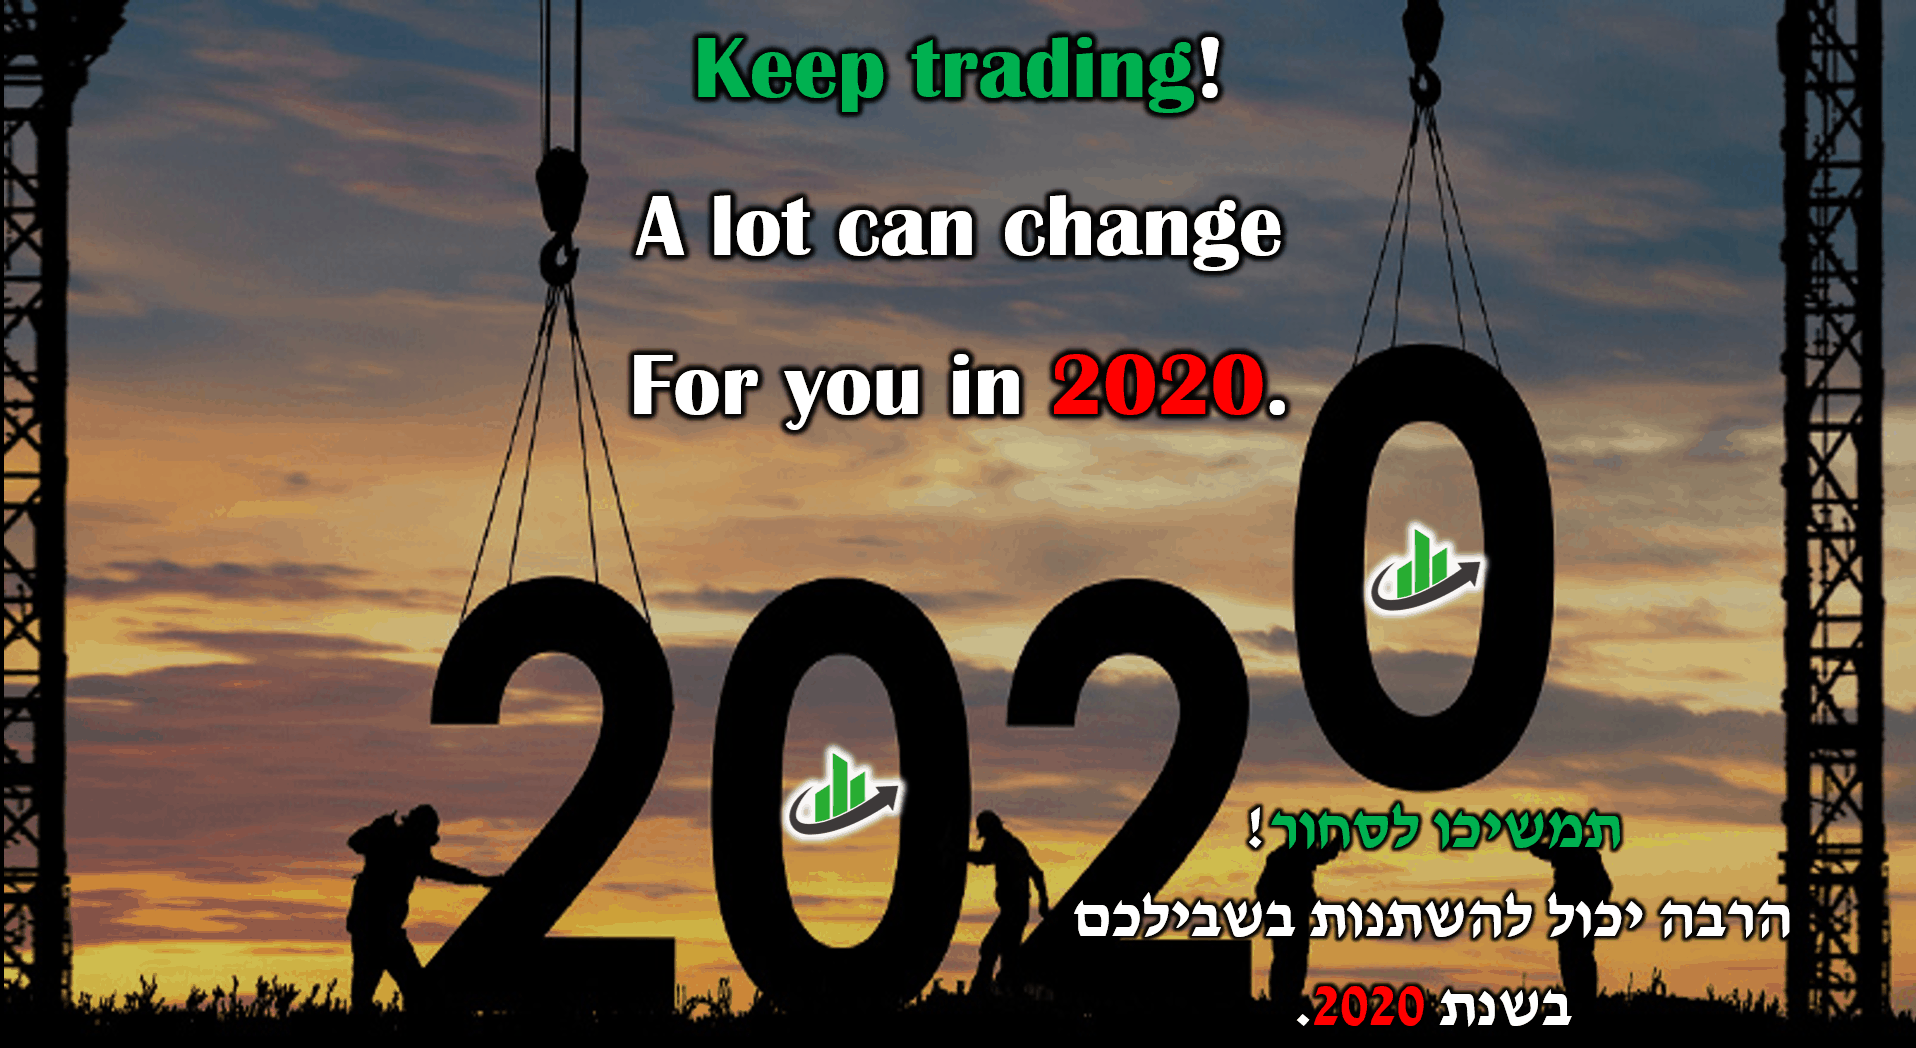 Keep trading! A lot can change For you in 2020.